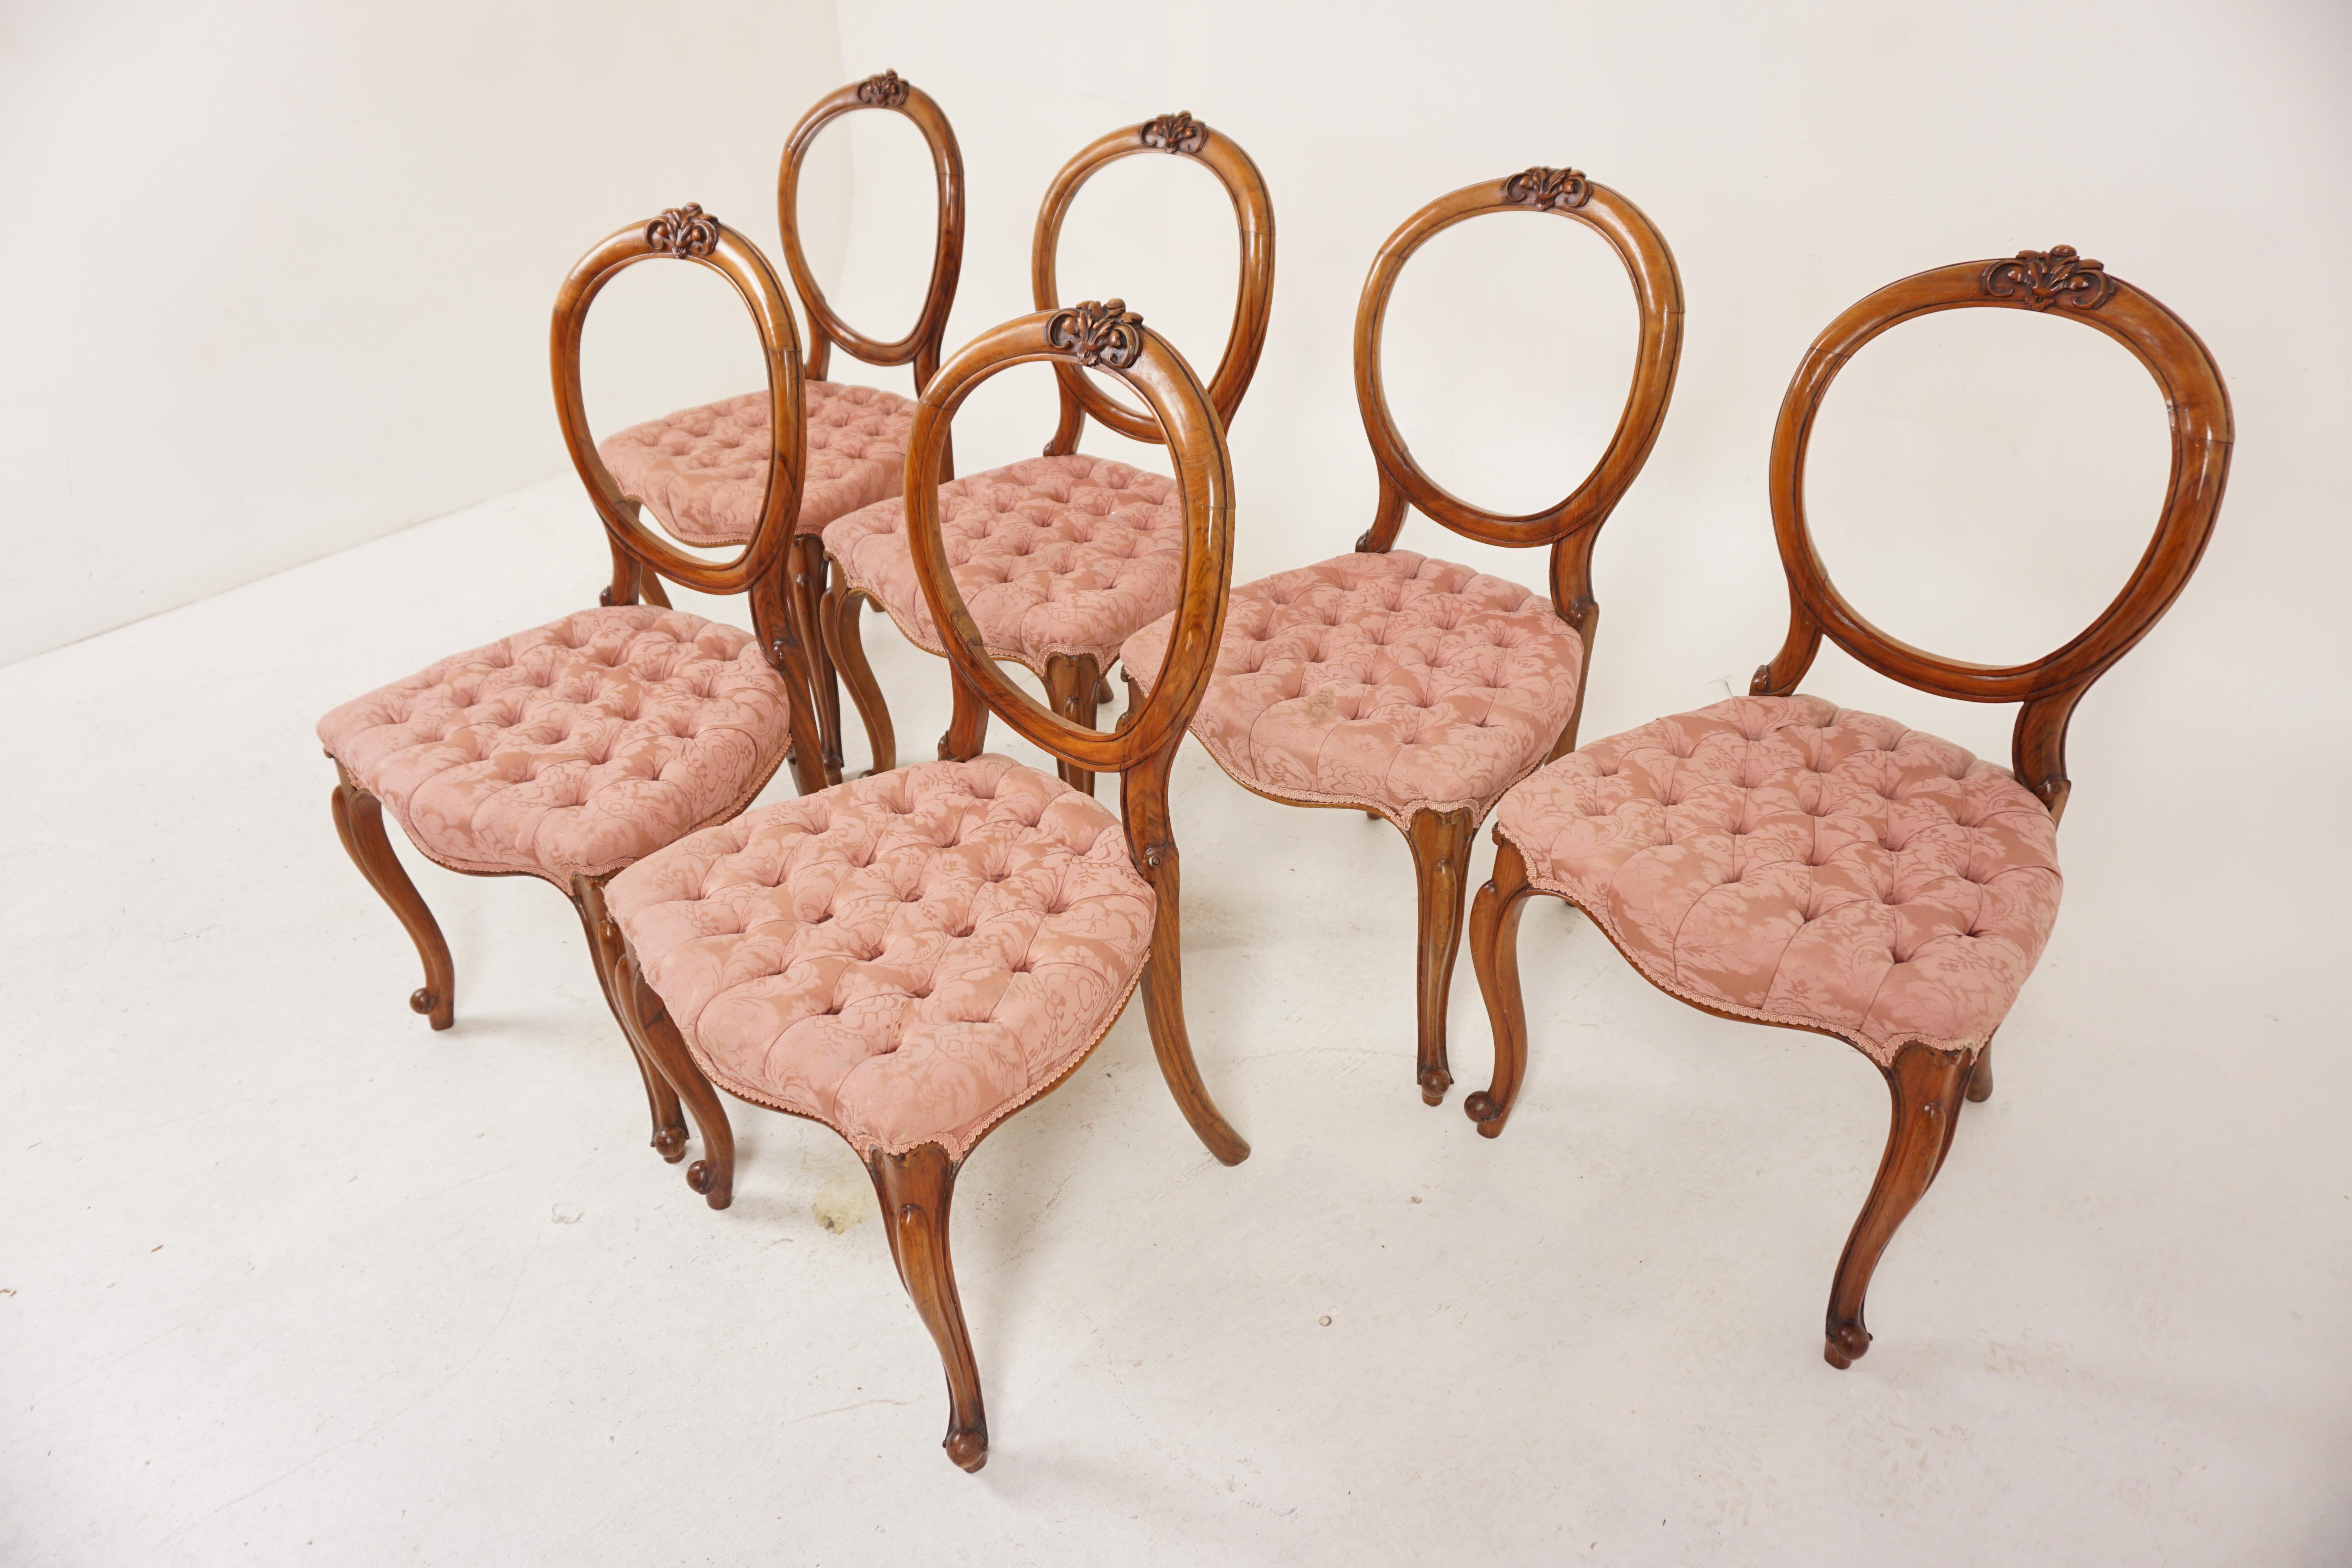 Set of 6 Victorian Carved Walnut Balloon Back Chairs, Scotland 1870, H1192

Scotland 1870
Solid Walnut
Original finish
Waisted rounded open backs
With a beautiful carved rail to the top and a shaped rail below
Serpentine padded seats
All supported